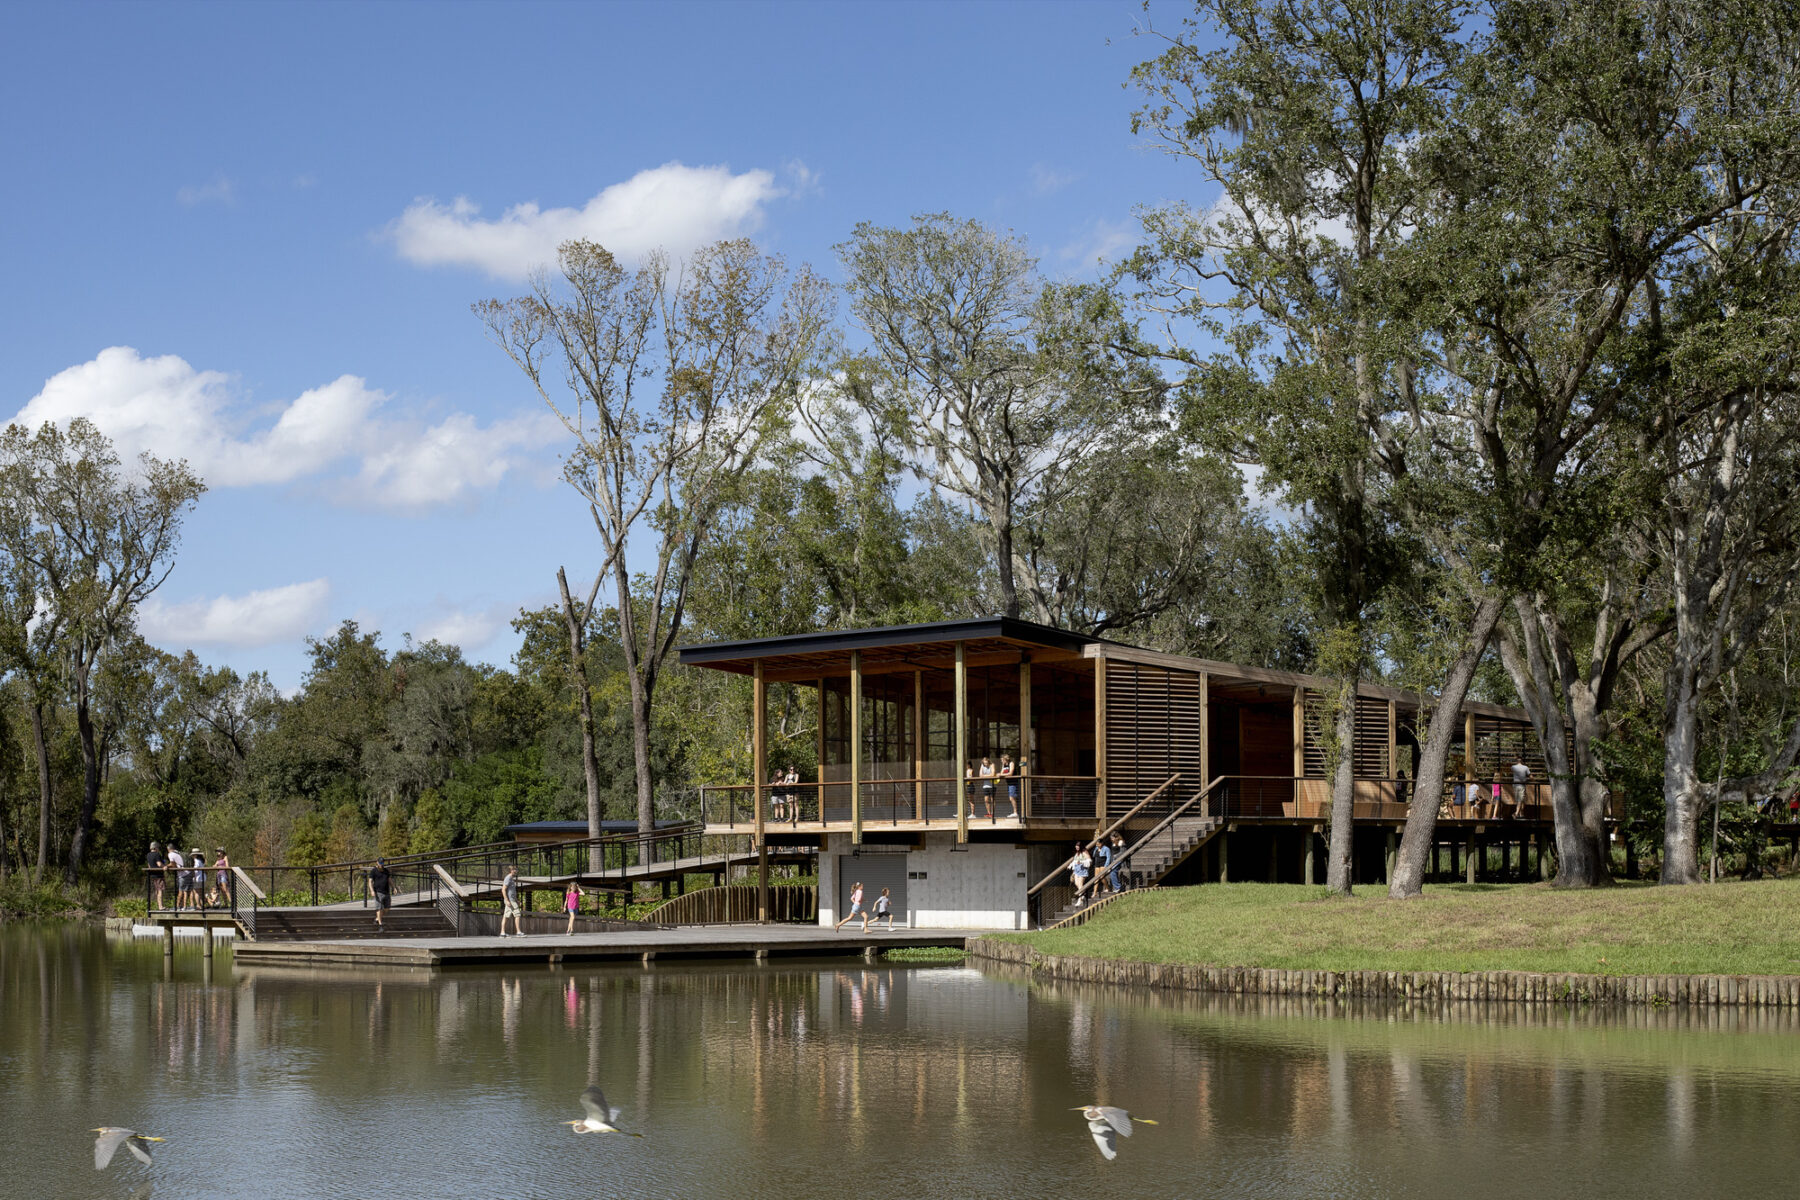 photograph of boathouse from across lagoon